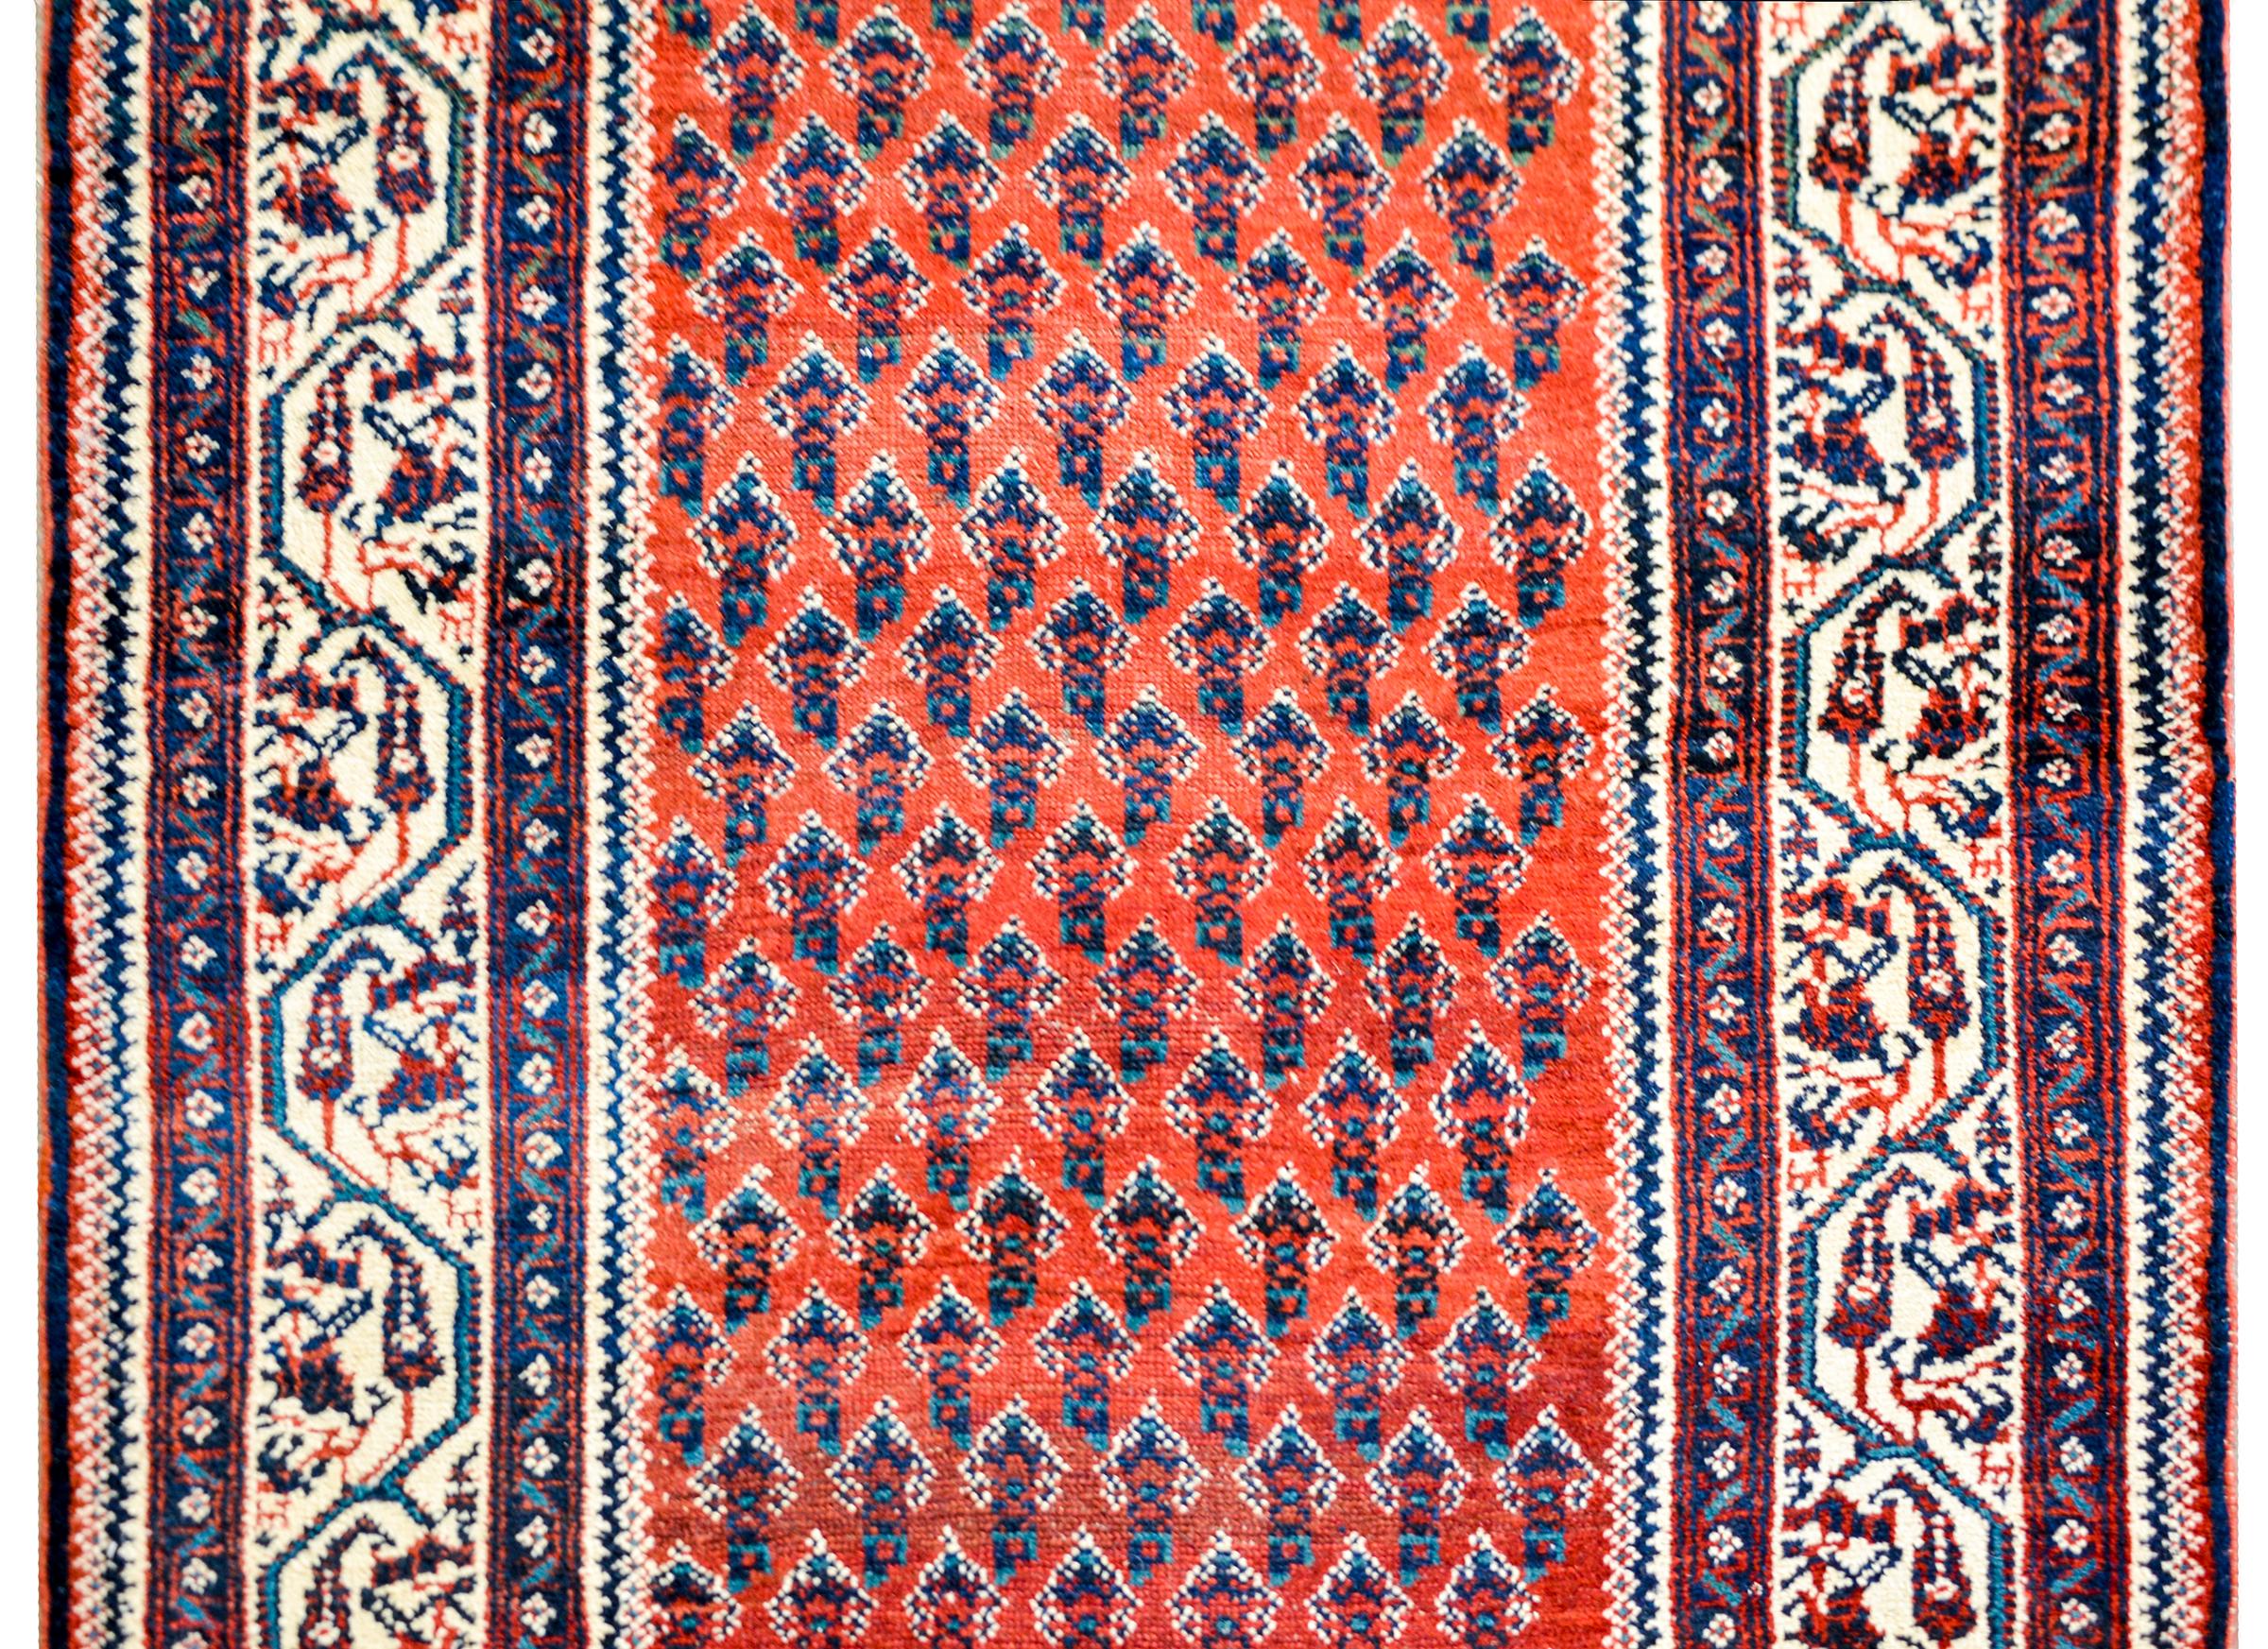 An early 20th century Persian Seraband runner with an all-over beautiful stylized paisley pattern woven in indigo, green, and crimson, on a crimson background surrounded by a fantastic border containing a wide central scrolling vine and paisley